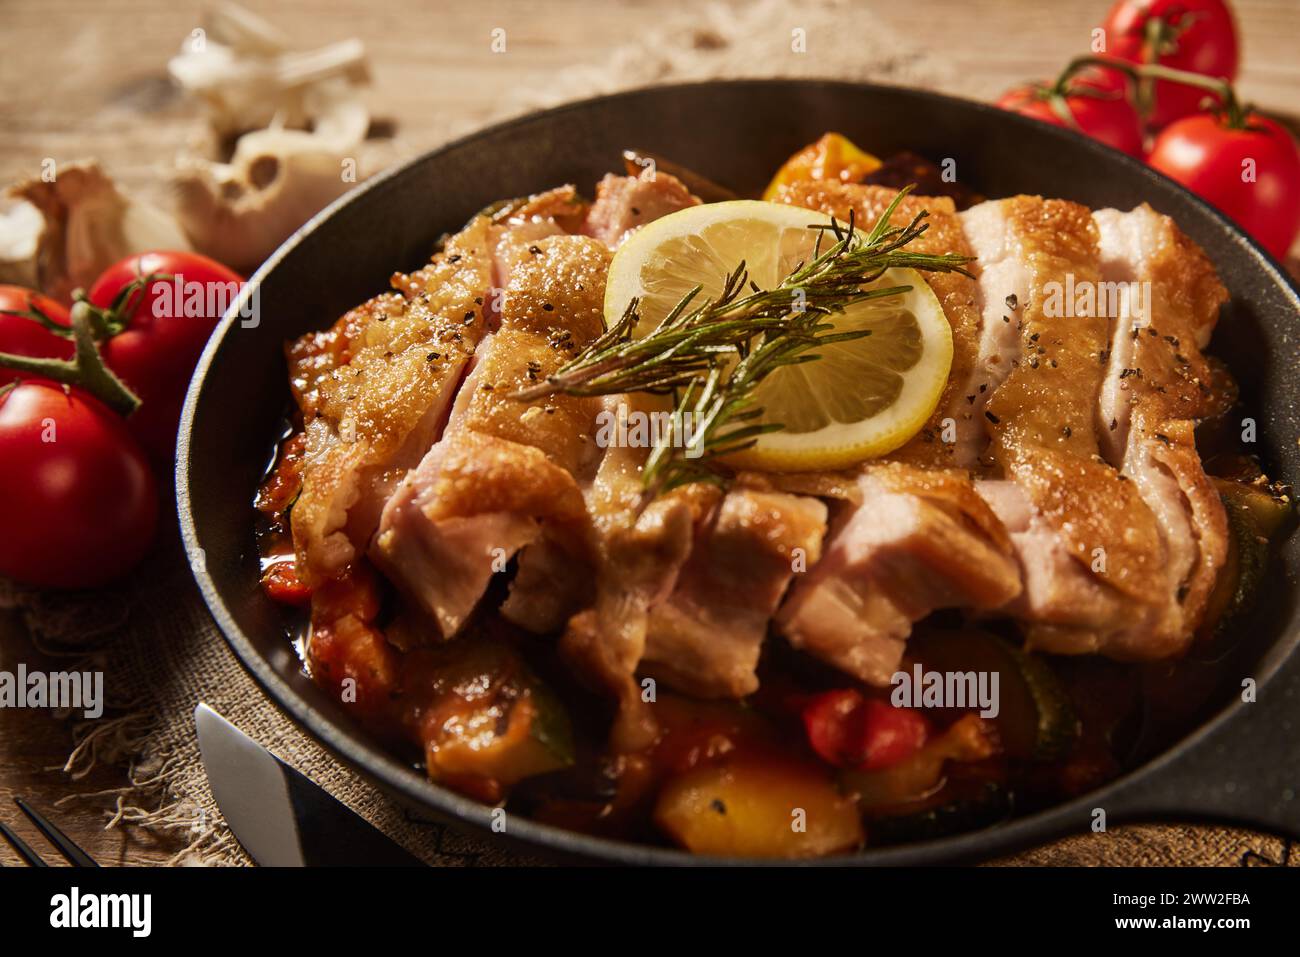 A pan with chicken vegetables and tomatoes Stock Photo